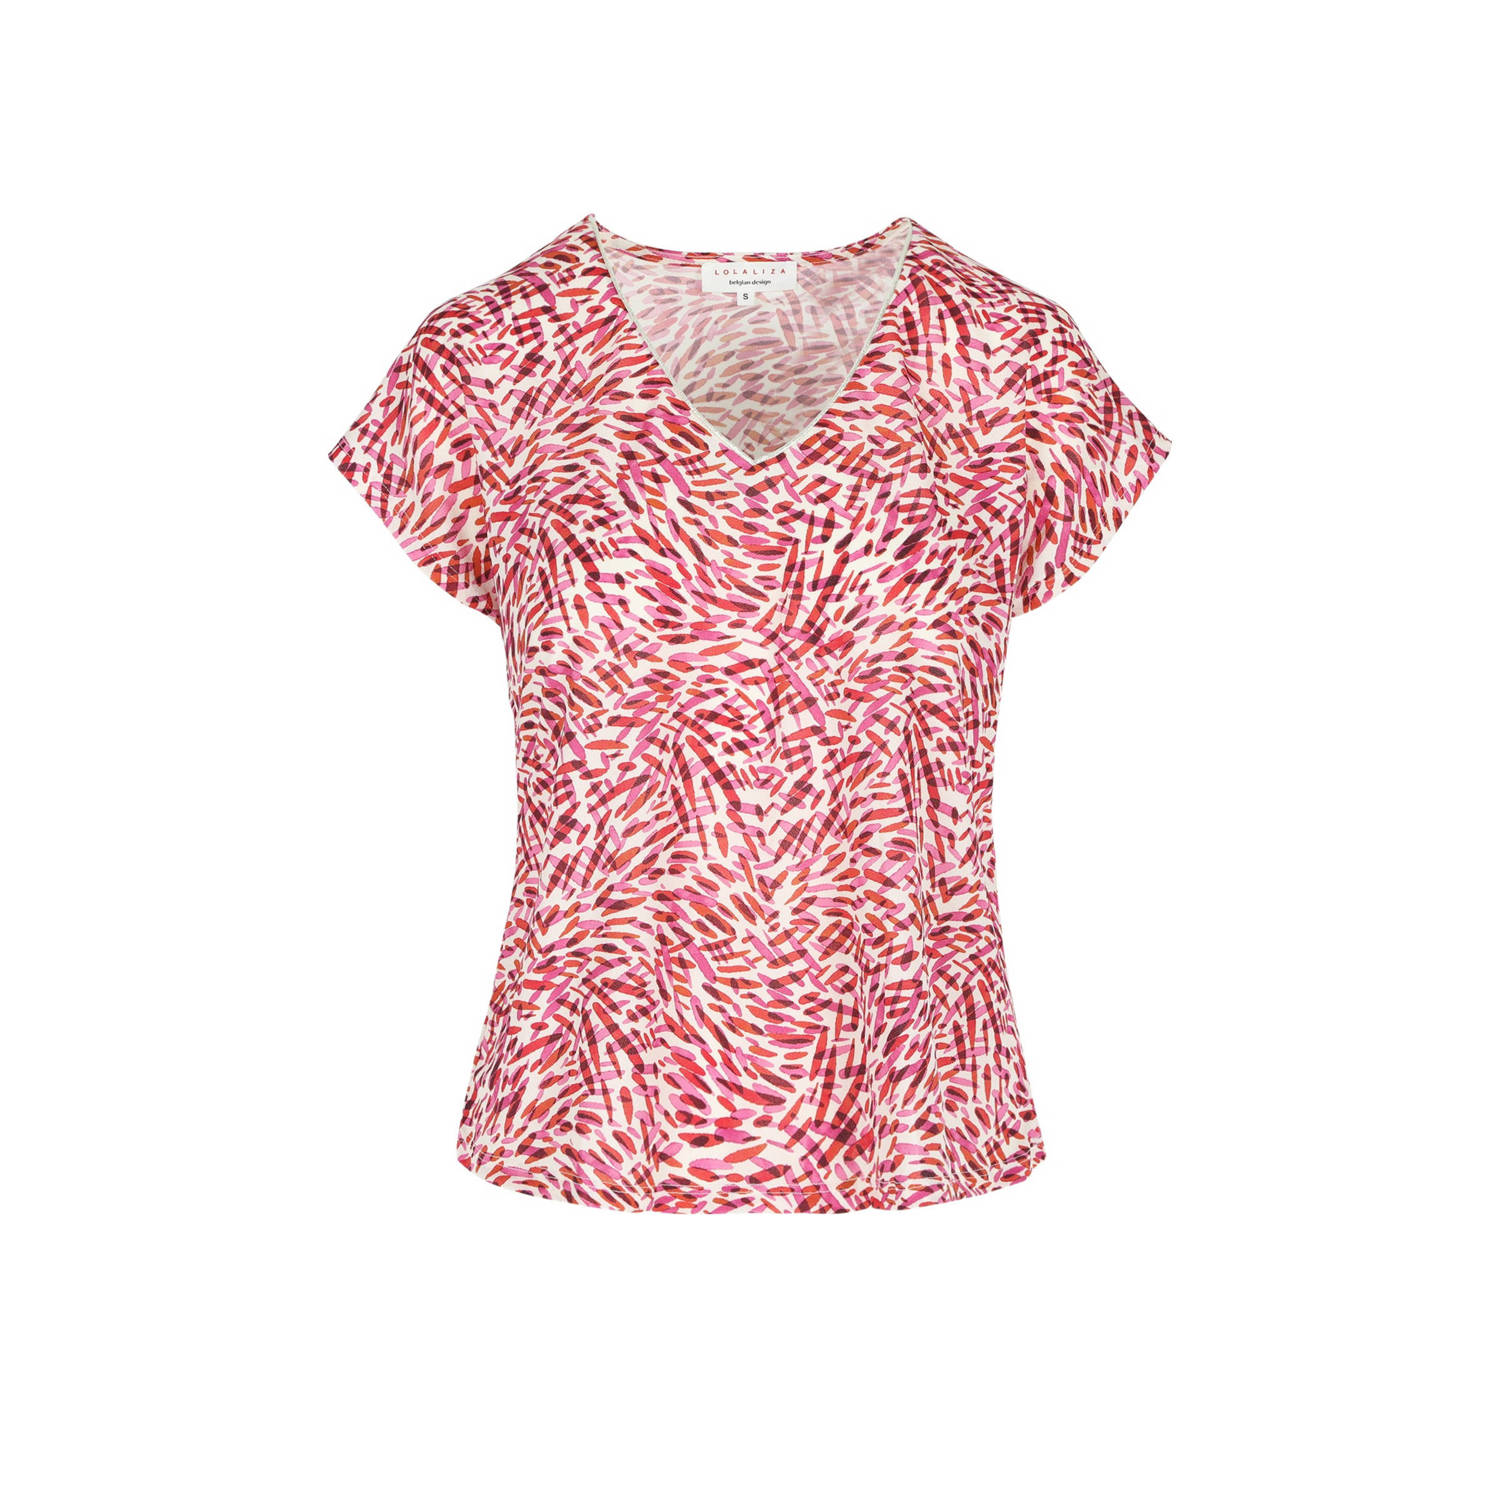 LOLALIZA T-shirt met all over print rood roze